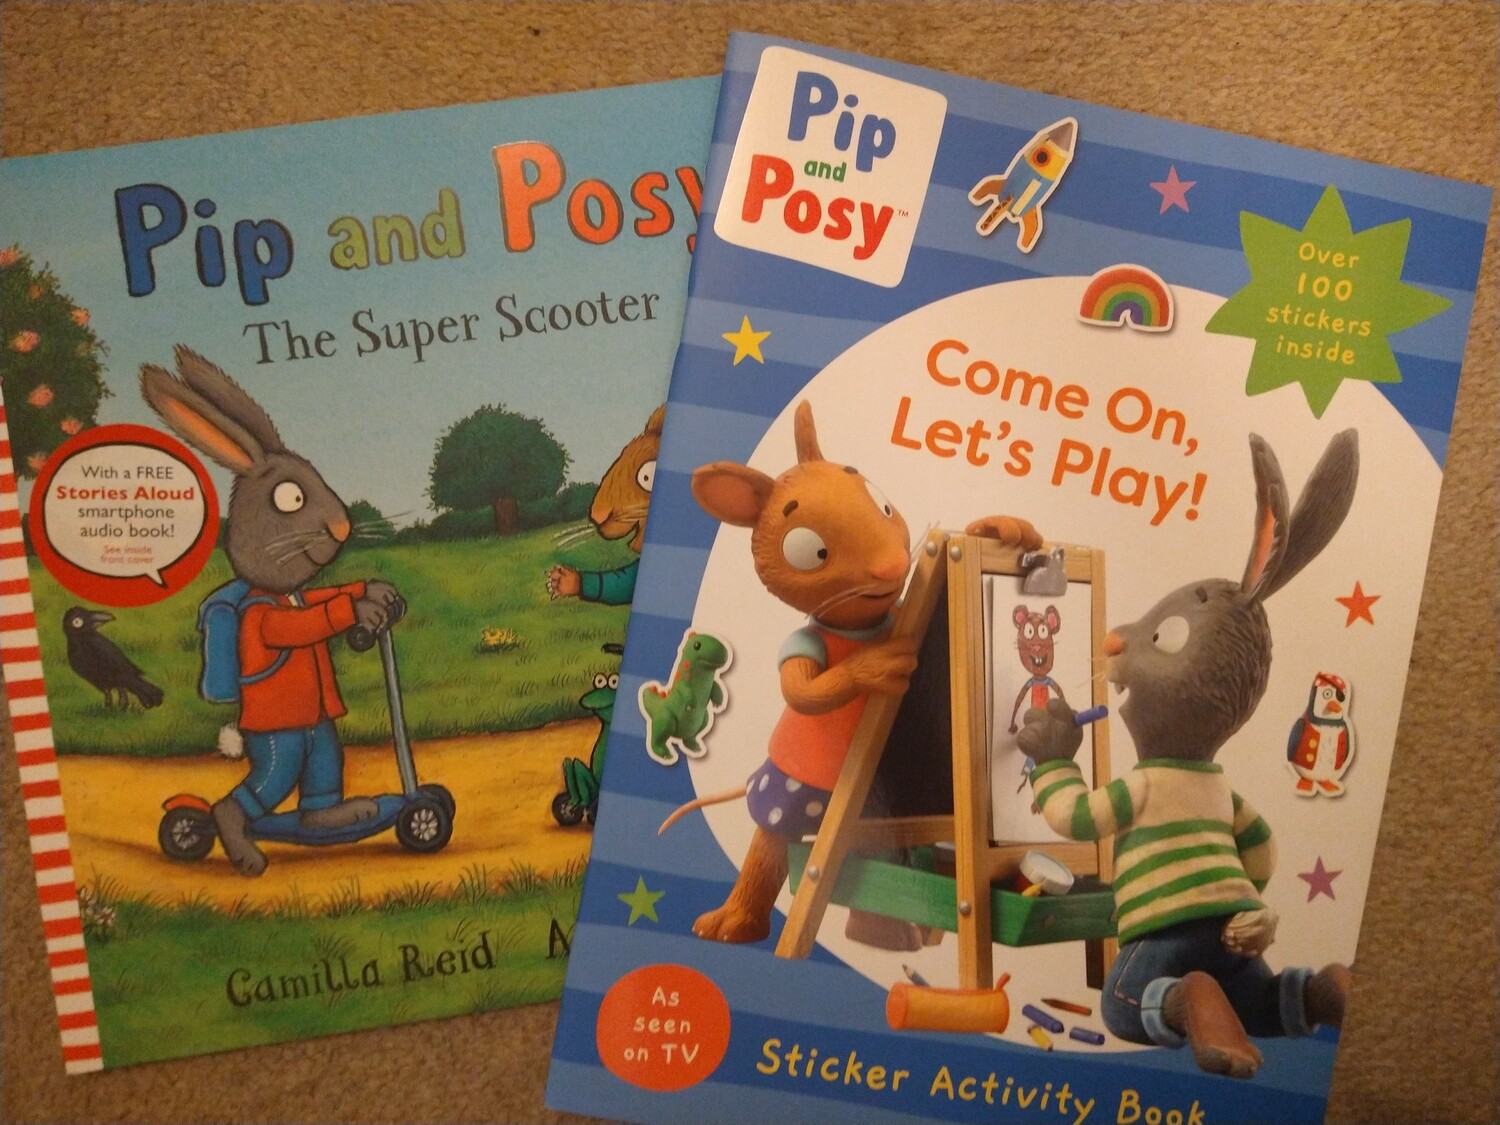 Pip and Posy: The Super Scooter + Activity book